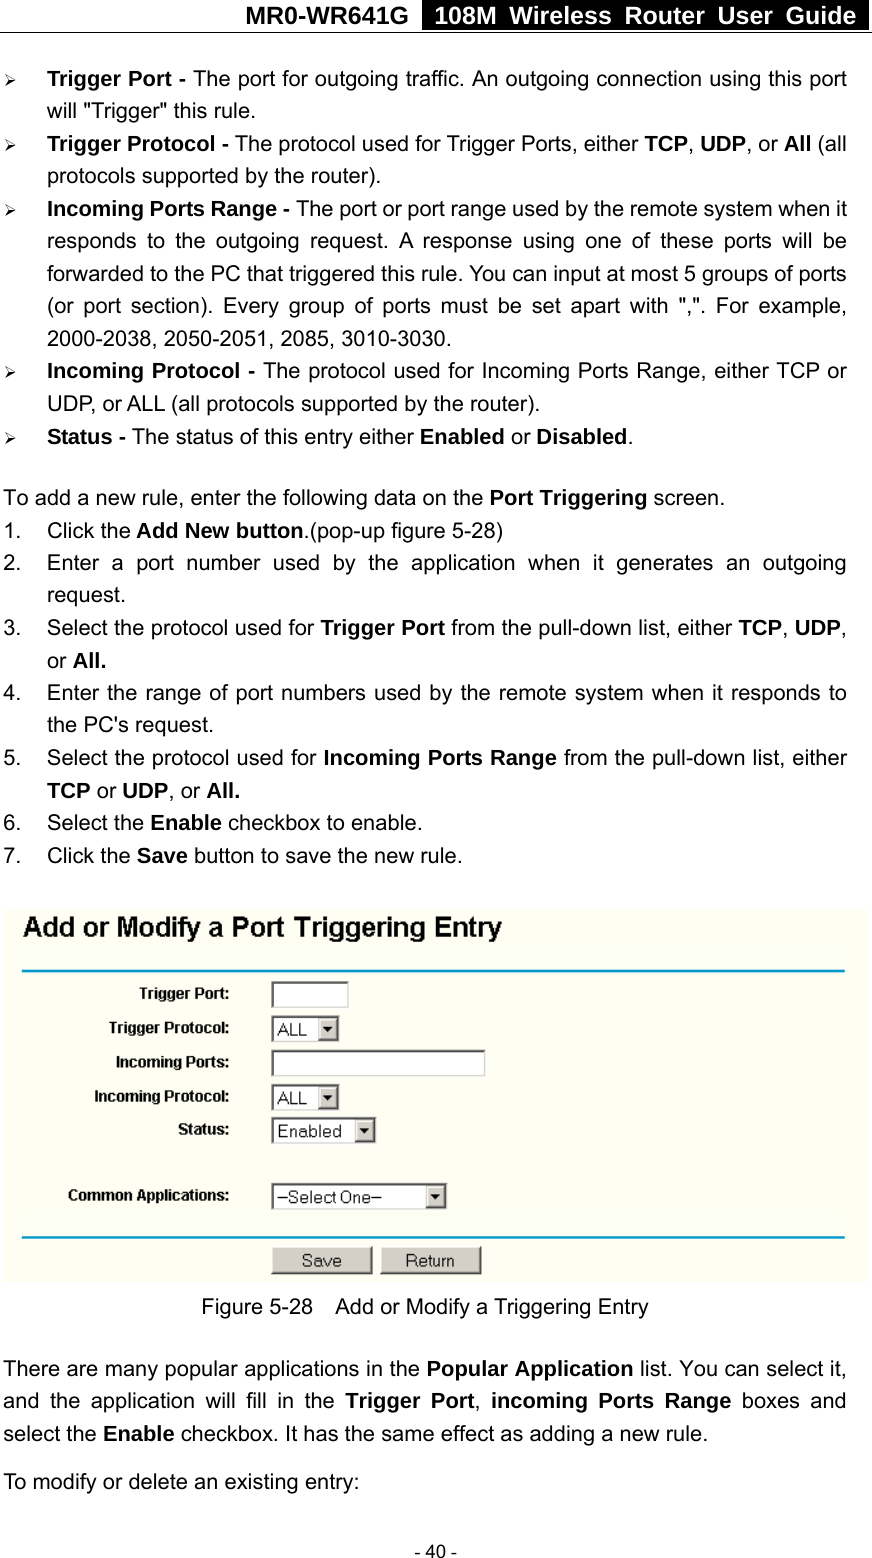 MR0-WR641G   108M Wireless Router User Guide  ¾ Trigger Port - The port for outgoing traffic. An outgoing connection using this port will &quot;Trigger&quot; this rule. ¾ Trigger Protocol - The protocol used for Trigger Ports, either TCP, UDP, or All (all protocols supported by the router). ¾ Incoming Ports Range - The port or port range used by the remote system when it responds to the outgoing request. A response using one of these ports will be forwarded to the PC that triggered this rule. You can input at most 5 groups of ports (or port section). Every group of ports must be set apart with &quot;,&quot;. For example, 2000-2038, 2050-2051, 2085, 3010-3030. ¾ Incoming Protocol - The protocol used for Incoming Ports Range, either TCP or UDP, or ALL (all protocols supported by the router). ¾ Status - The status of this entry either Enabled or Disabled. To add a new rule, enter the following data on the Port Triggering screen.   1. Click the Add New button.(pop-up figure 5-28) 2.  Enter a port number used by the application when it generates an outgoing request.   3.  Select the protocol used for Trigger Port from the pull-down list, either TCP, UDP, or All. 4.  Enter the range of port numbers used by the remote system when it responds to the PC&apos;s request. 5.  Select the protocol used for Incoming Ports Range from the pull-down list, either TCP or UDP, or All. 6. Select the Enable checkbox to enable.   7. Click the Save button to save the new rule.  Figure 5-28    Add or Modify a Triggering Entry There are many popular applications in the Popular Application list. You can select it, and the application will fill in the Trigger Port,  incoming Ports Range boxes and select the Enable checkbox. It has the same effect as adding a new rule. To modify or delete an existing entry:  - 40 - 